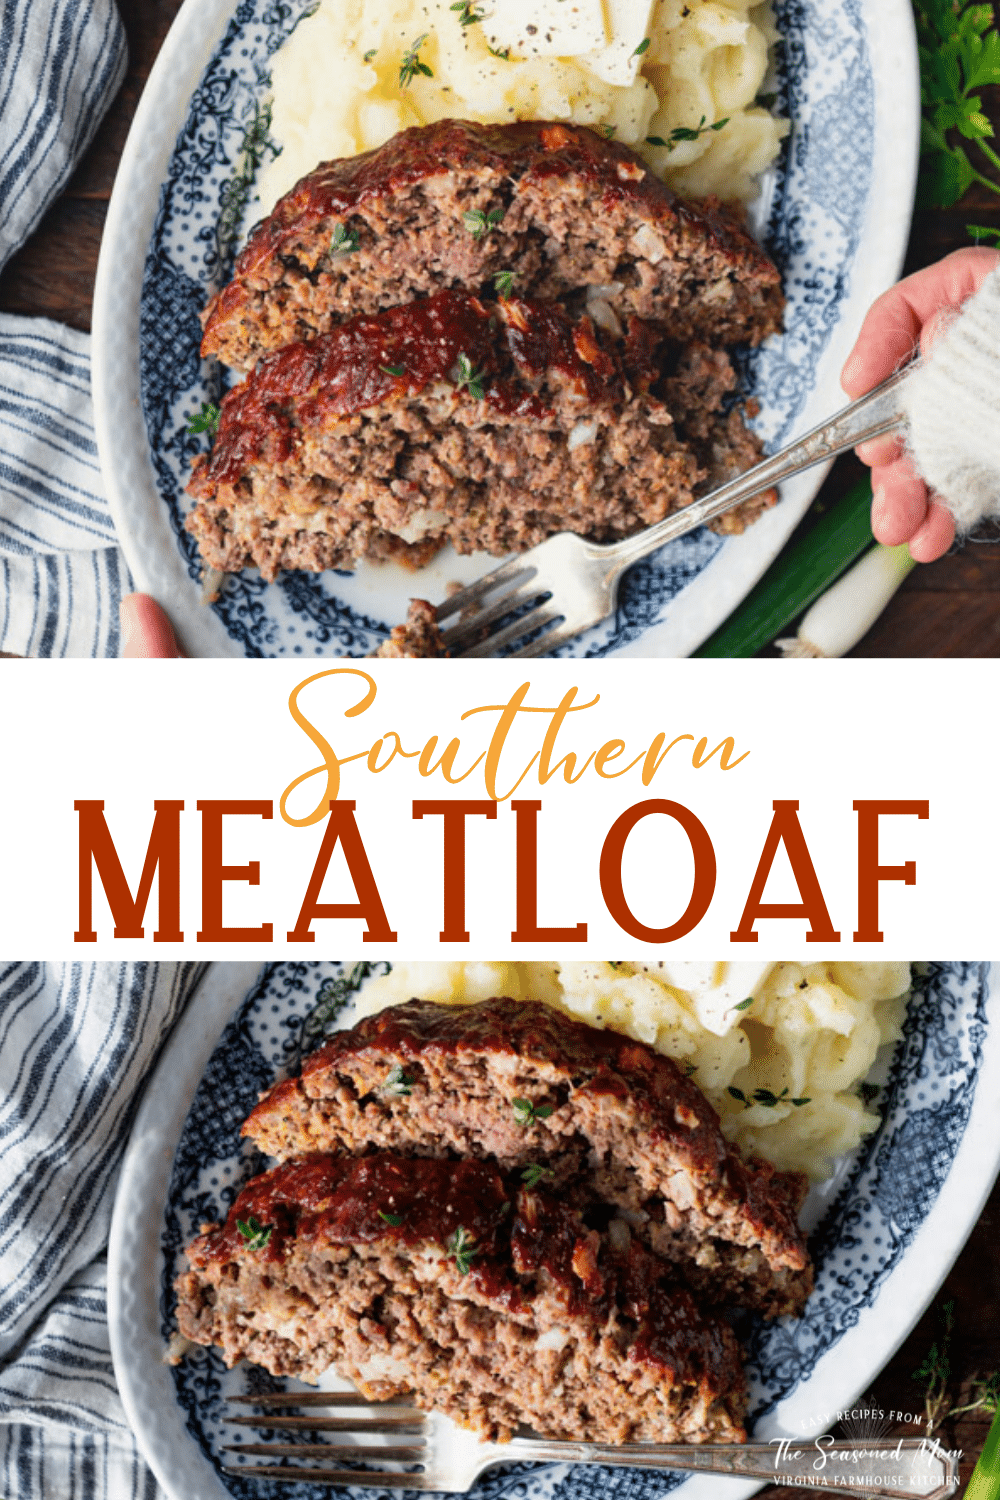 Southern Meatloaf Recipe - The Seasoned Mom